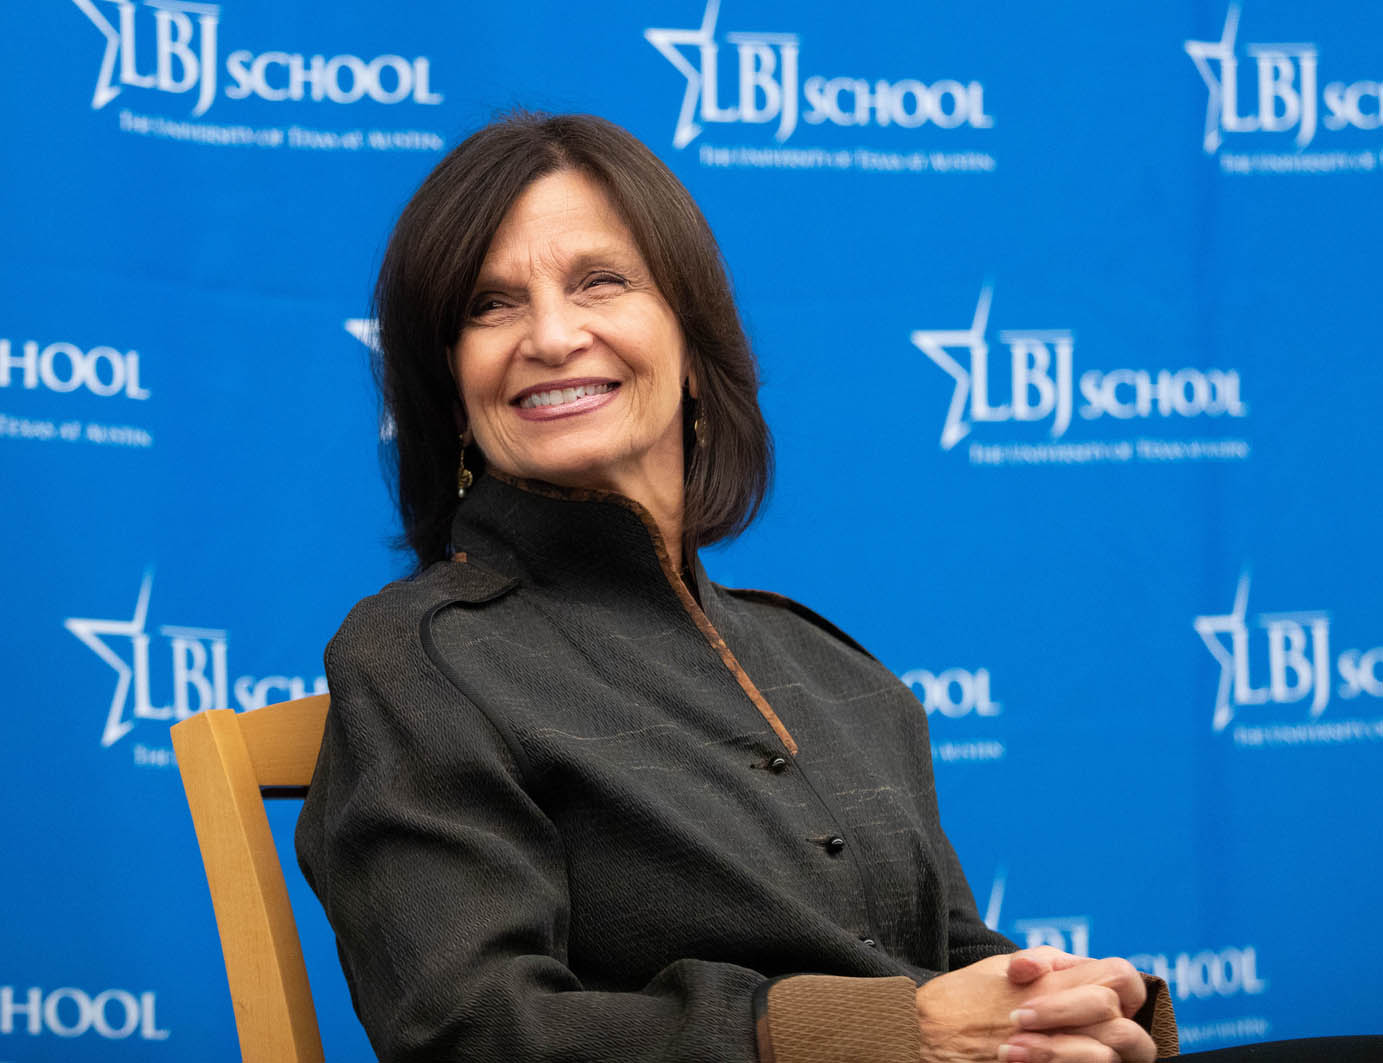 LBJ School Dean Angela Evans during the private session with Hillary Clinton and LBJ students, Nov. 13, 2018